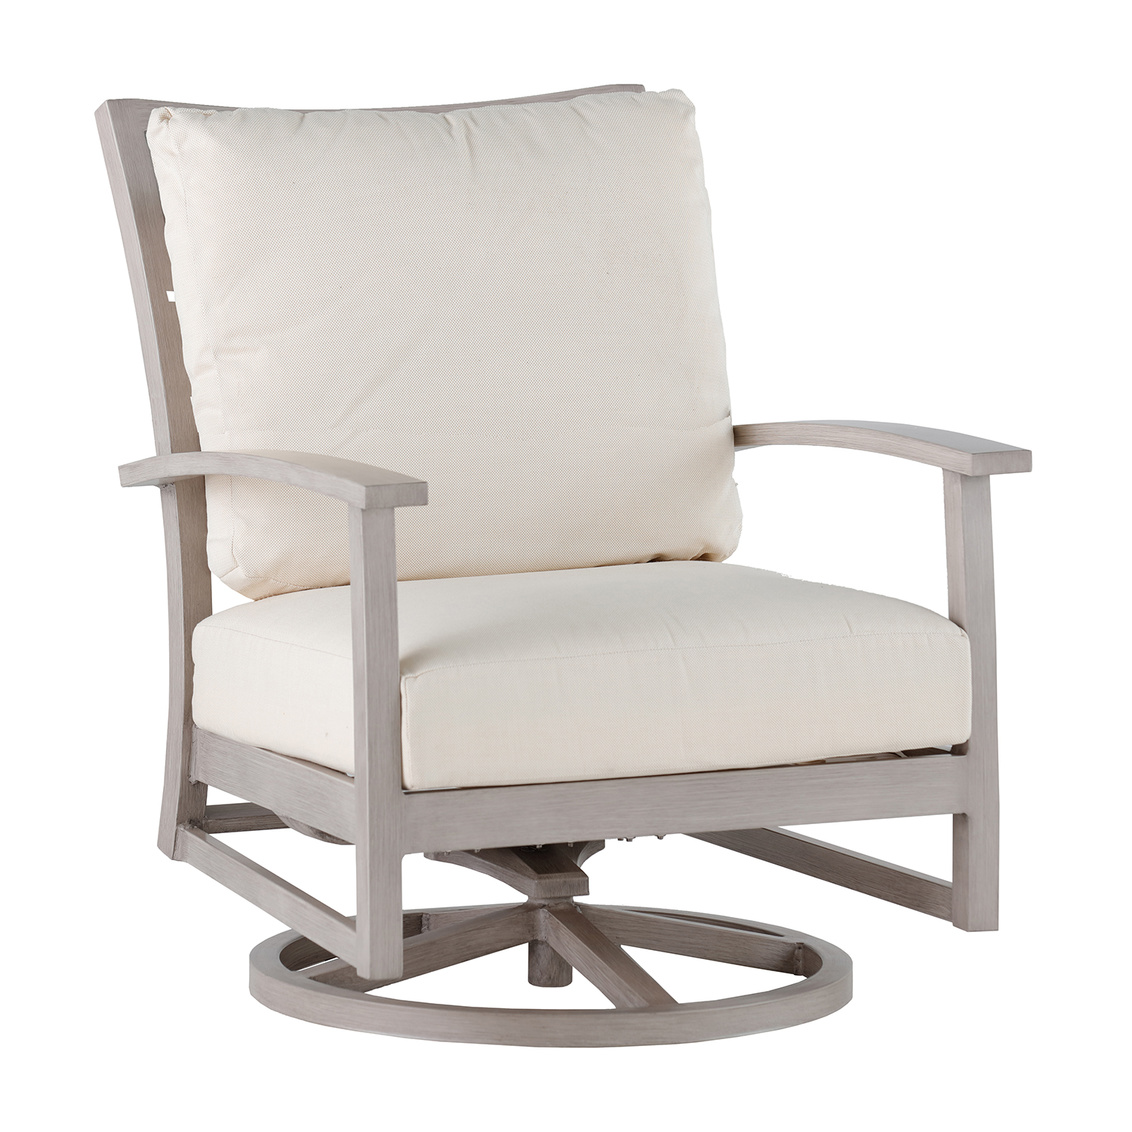 charleston swivel rocker lounge chair in oyster – frame only product image